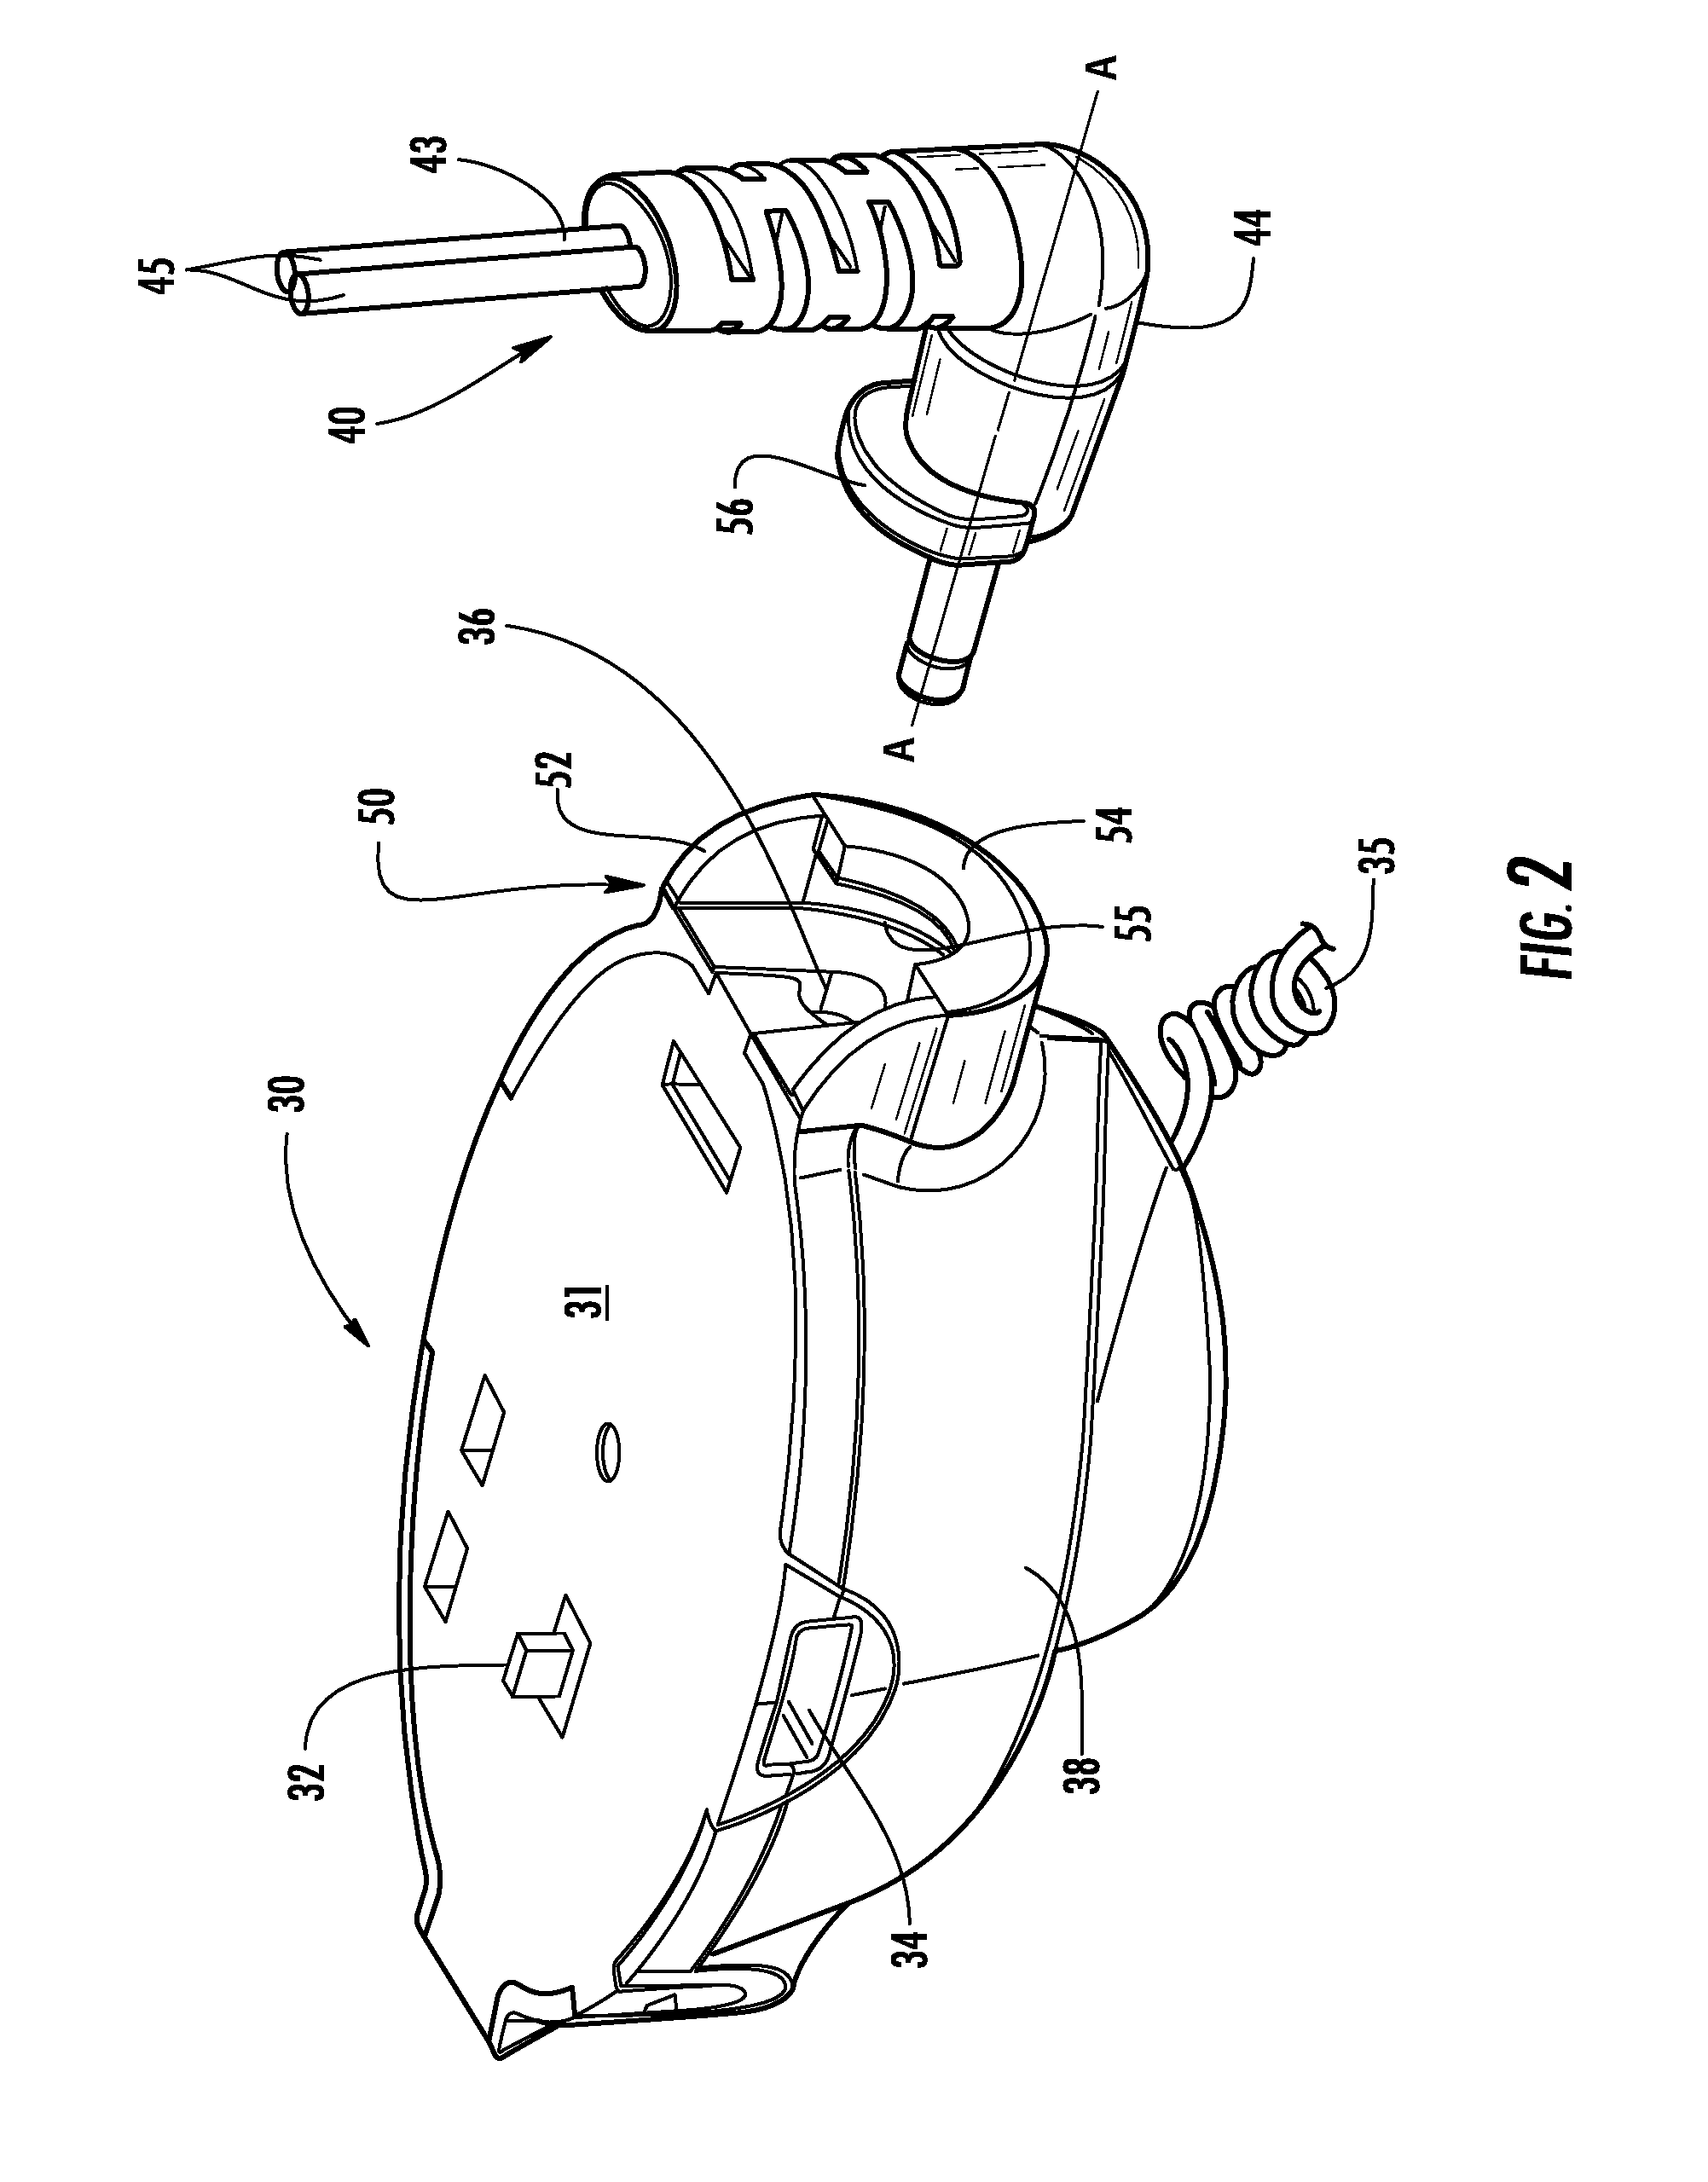 Merchandise display security device including means for retaining power adapter cord